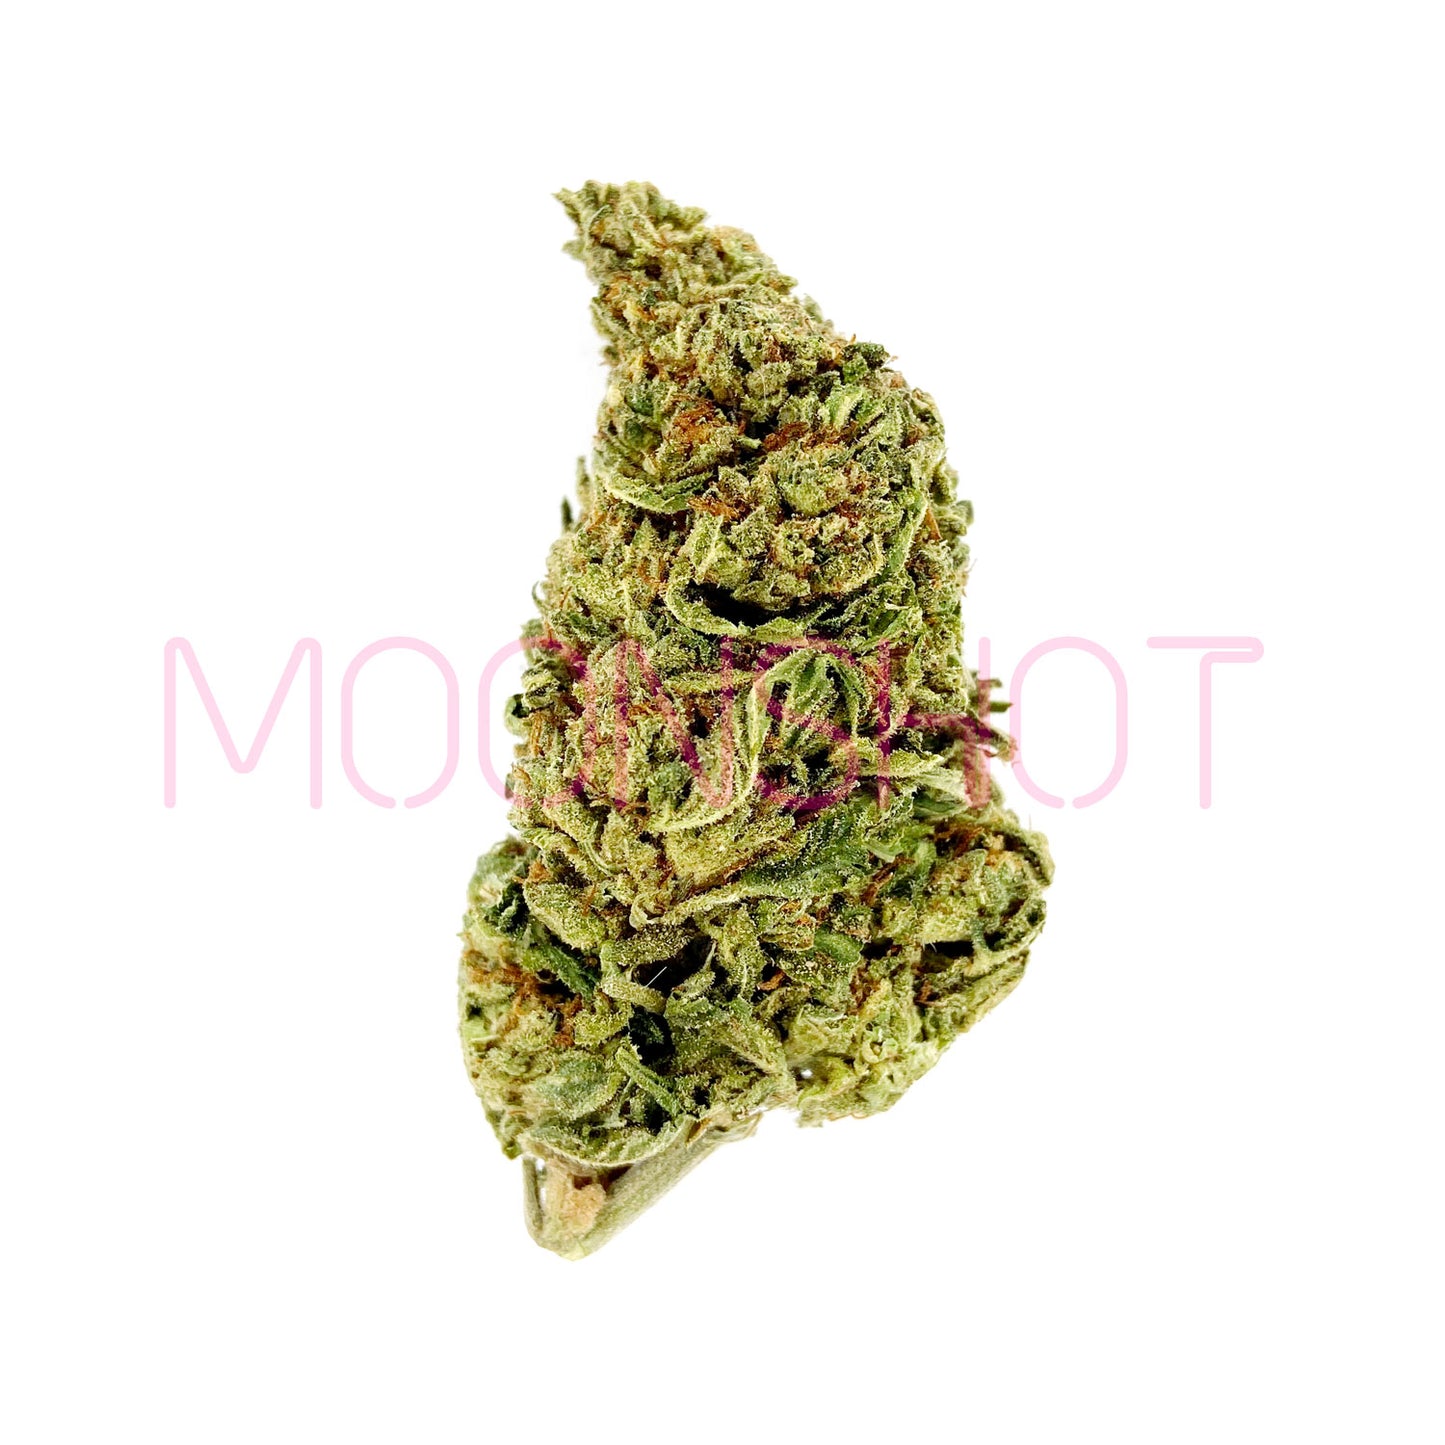 A nug of cannabis flower from the Sour Diesel strain sits against a white background.